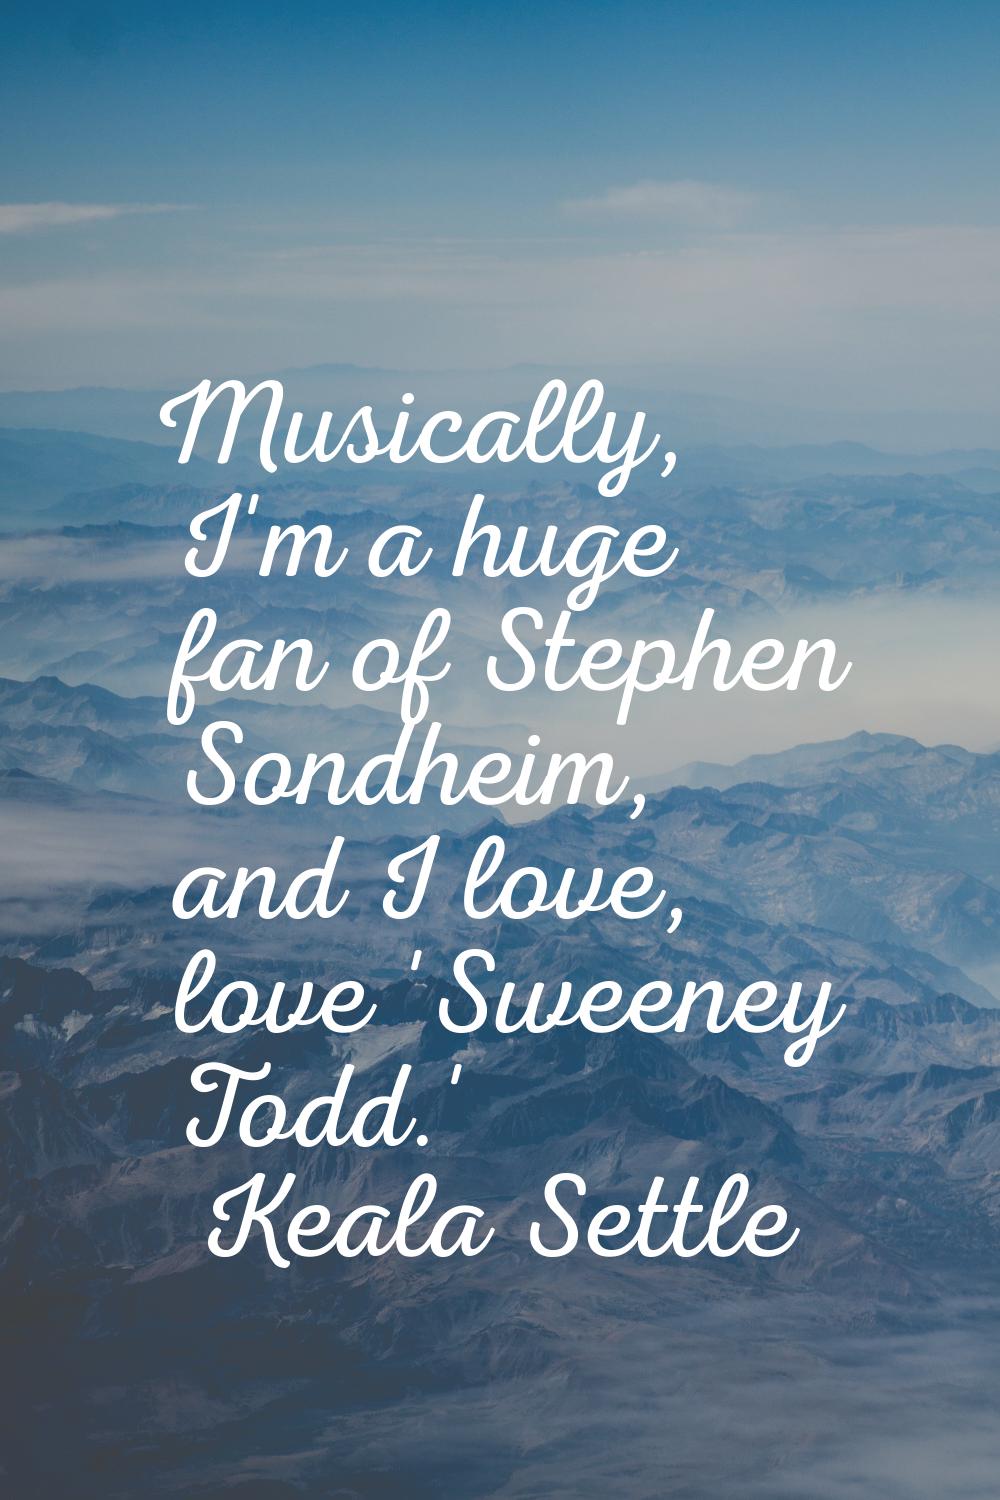 Musically, I'm a huge fan of Stephen Sondheim, and I love, love 'Sweeney Todd.'